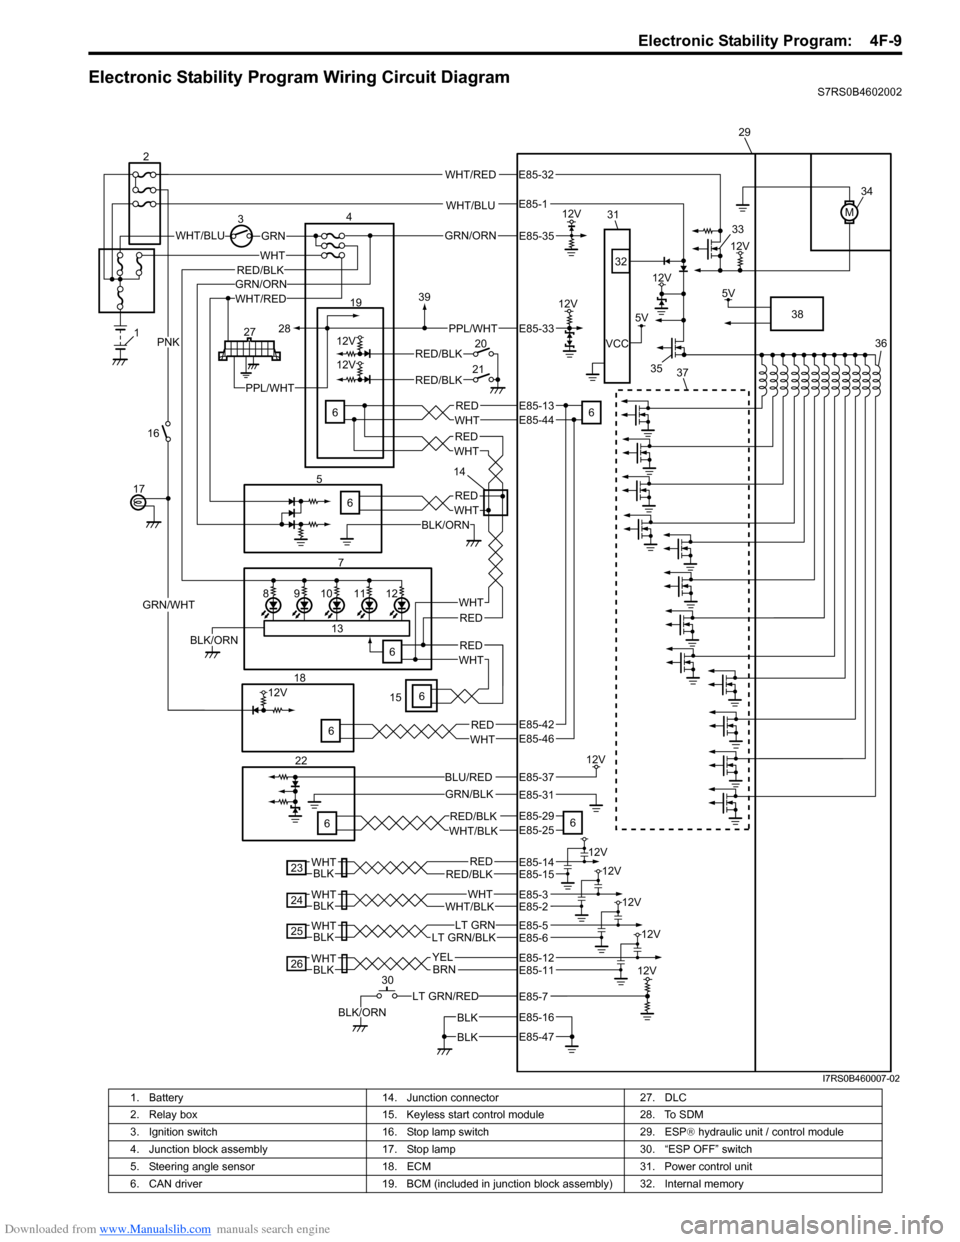 SUZUKI SWIFT 2006 2.G Service User Guide Downloaded from www.Manualslib.com manuals search engine Electronic Stability Program:  4F-9
Electronic Stability Program Wiring Circuit DiagramS7RS0B4602002
WHT/BLU
WHT/BLUGRN
M
12V3
12V
5V
12V
VCC
W